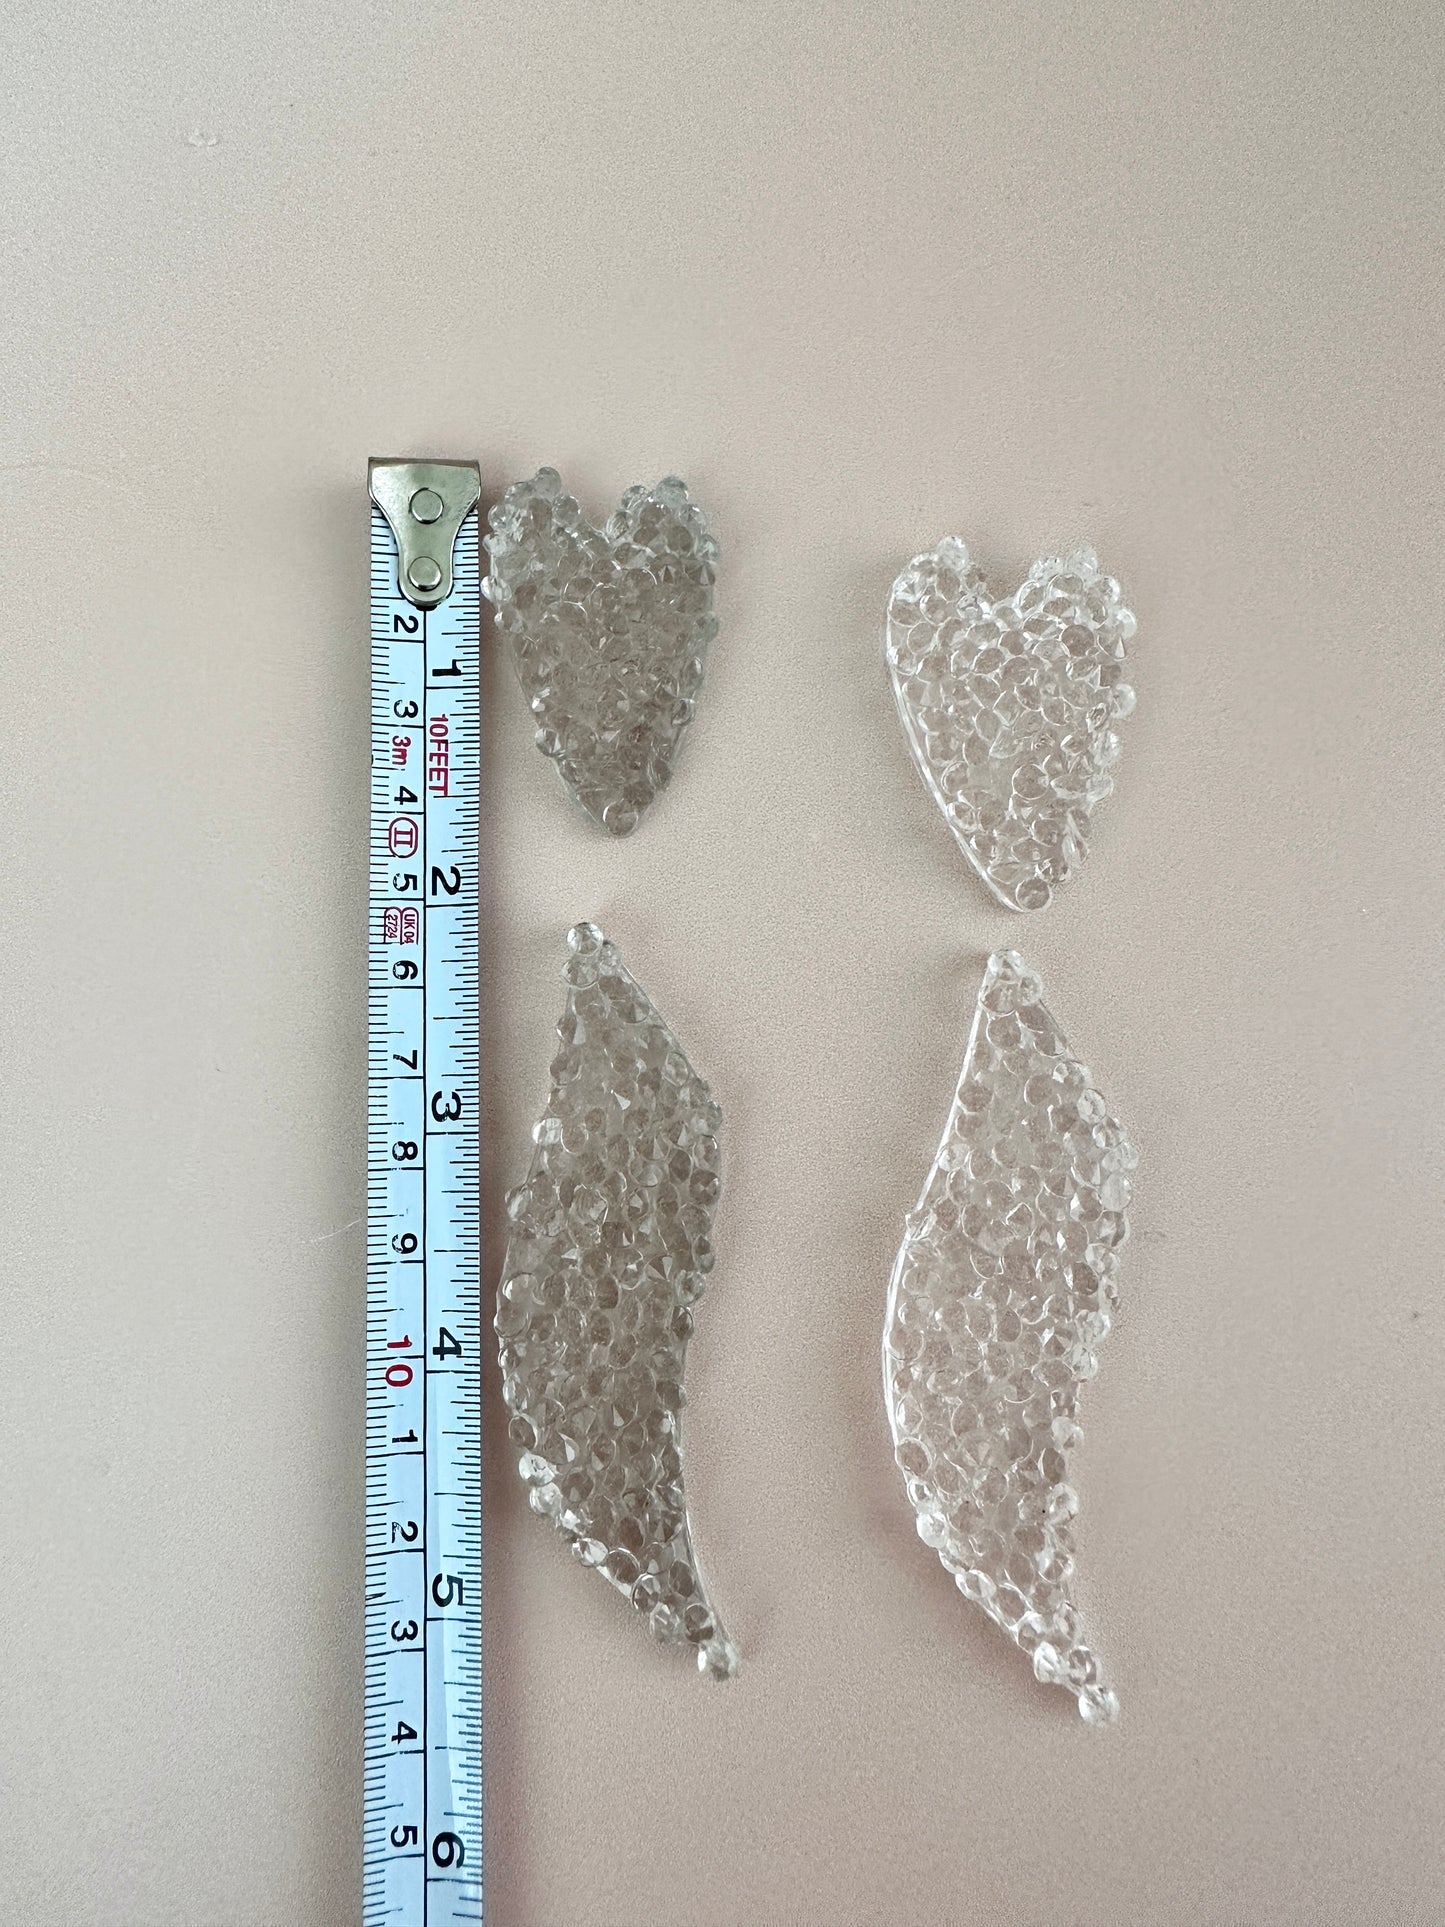 Silicone Mold Crystal Shapes in the Form of Leaves and Hearts for Crafting Jewelry, Keychains, and Pendants